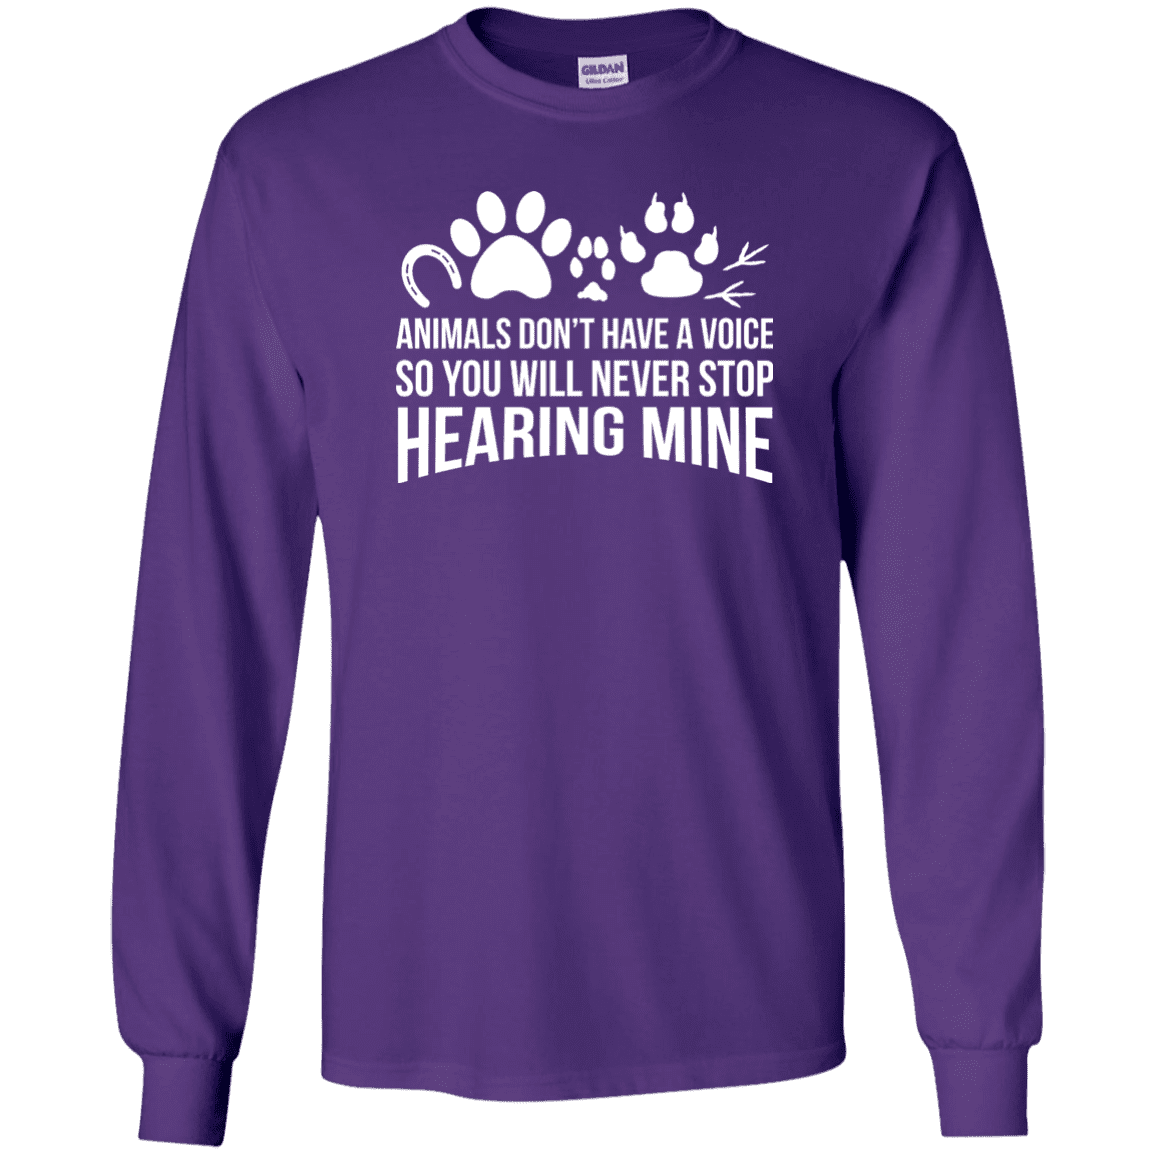 Animals Don't Have A Voice - Long Sleeve T Shirt.